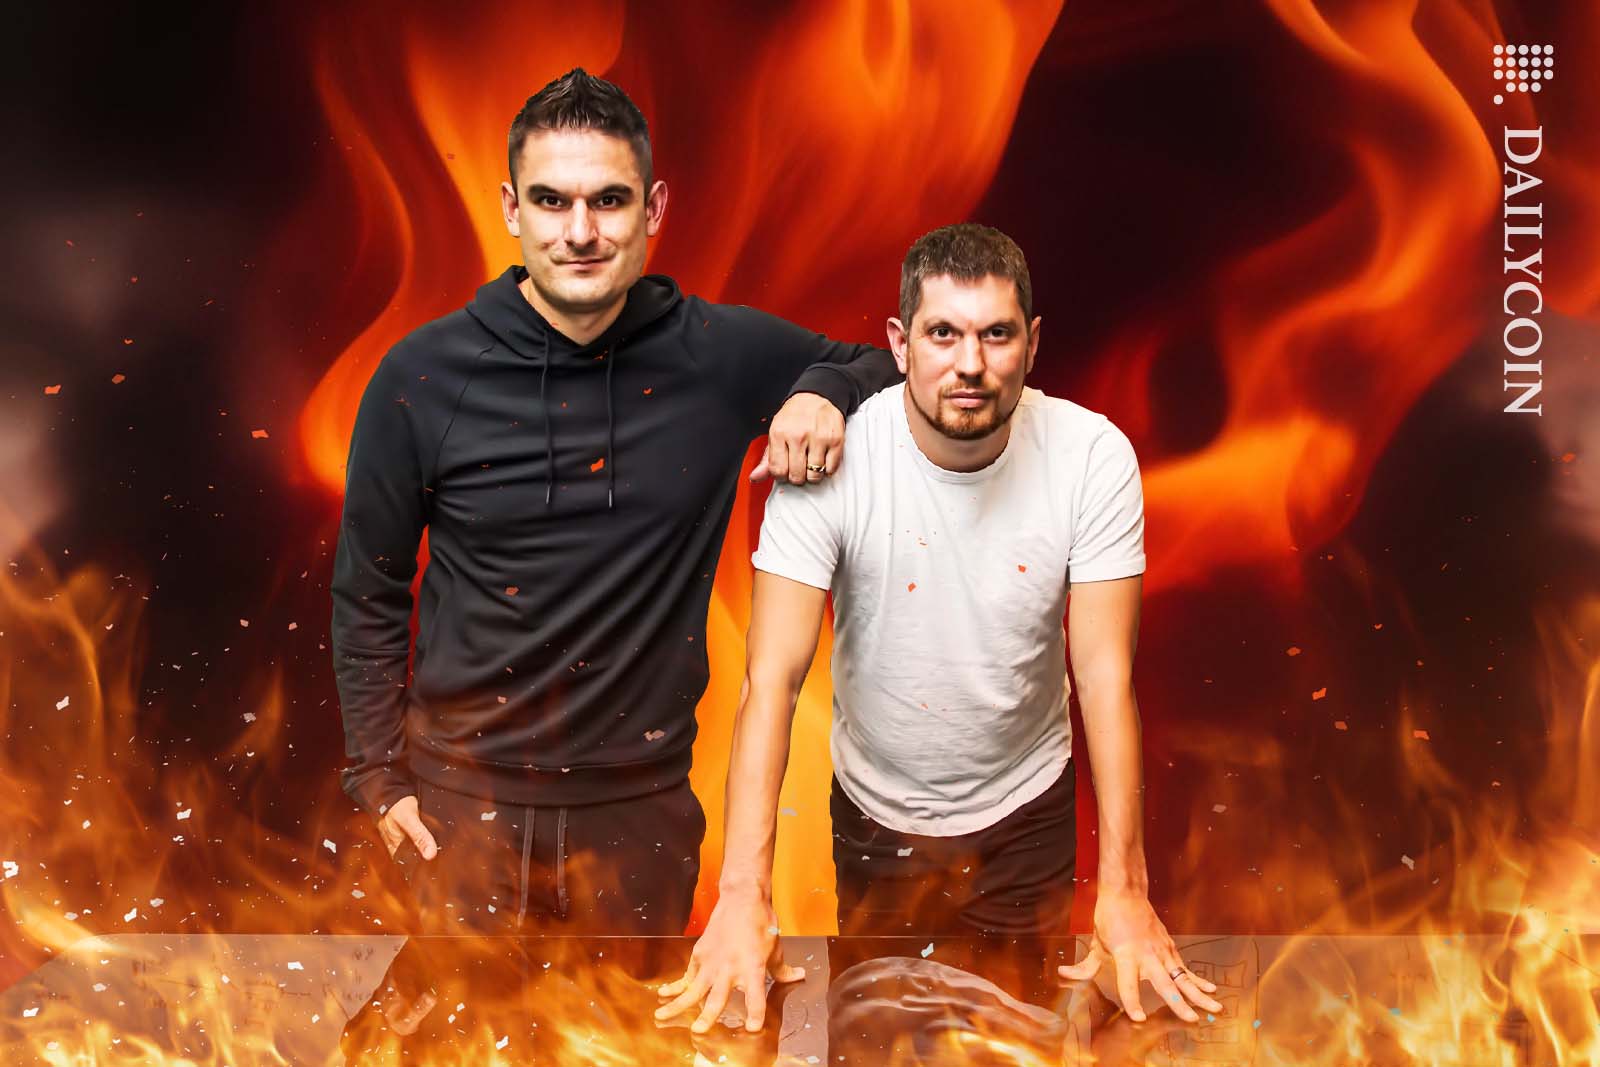 Ryan Zarick and Bryan Pellegrino have a wierd smile on, whilst staring at the camera surrounded by fire.